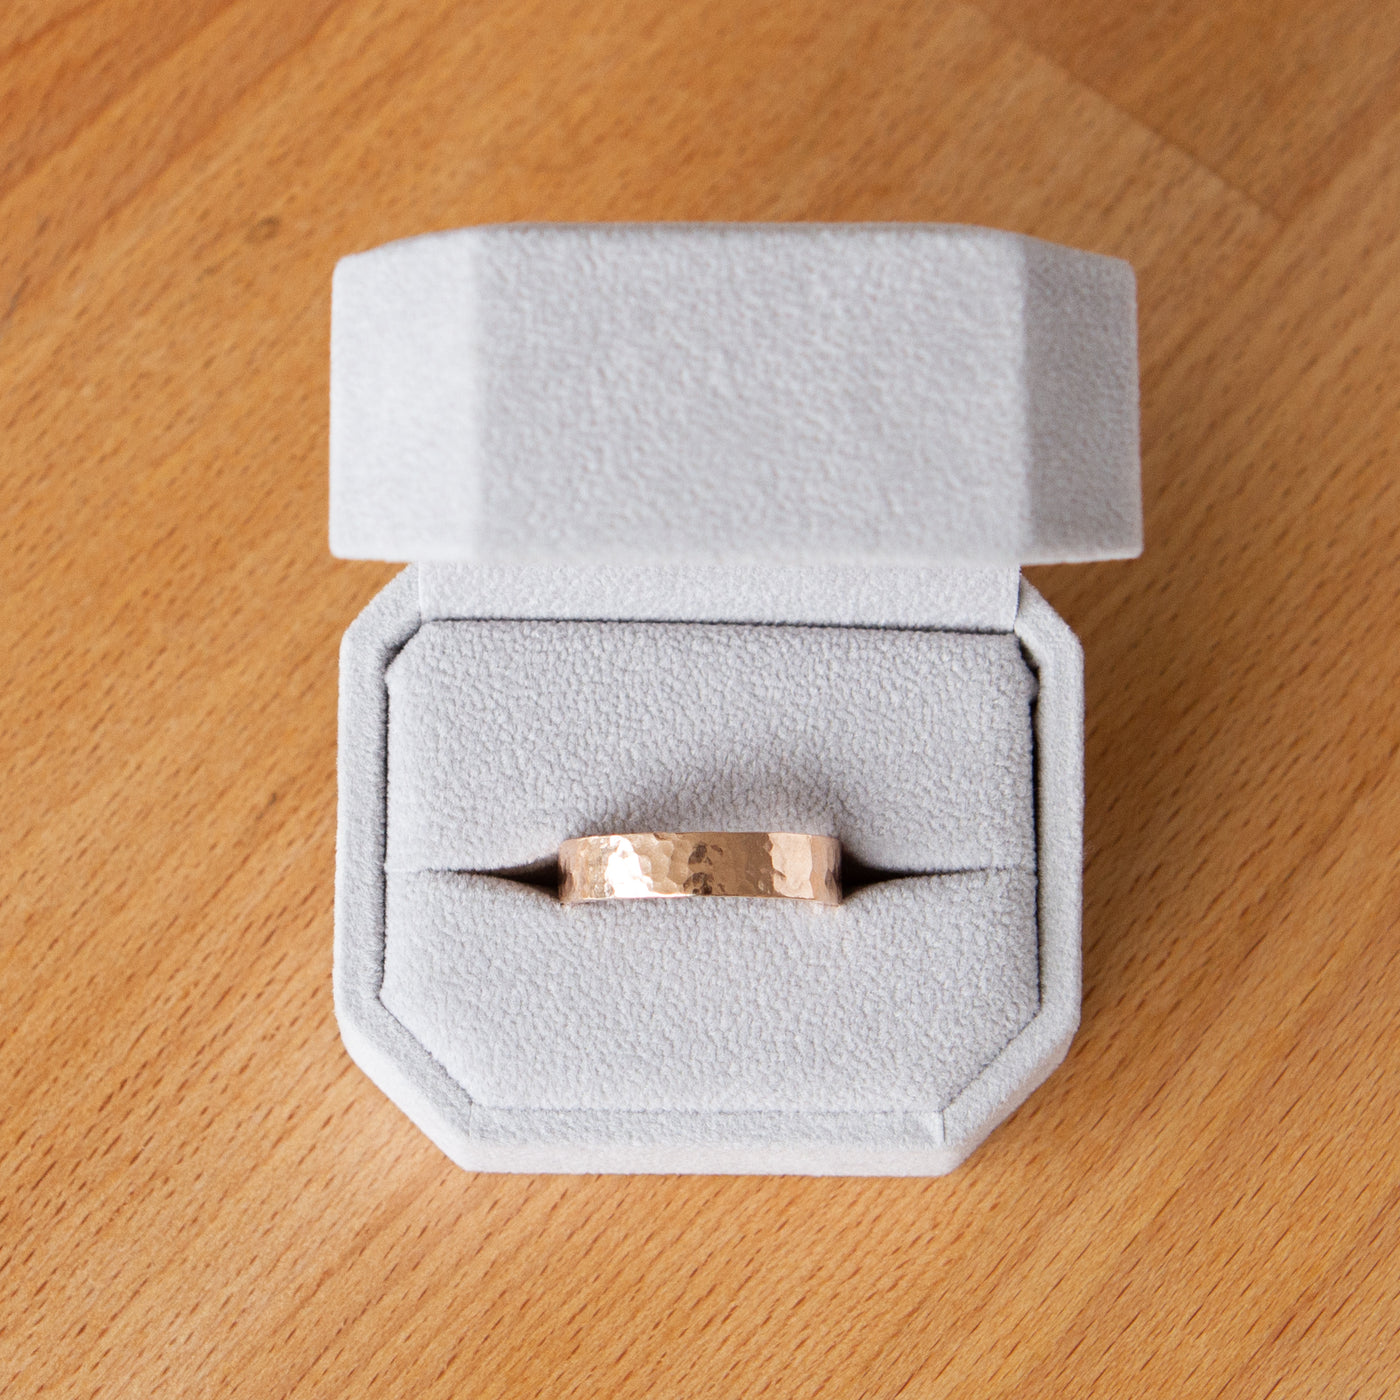 Blue Ridge rose gold flat hammered wedding band in a ring box